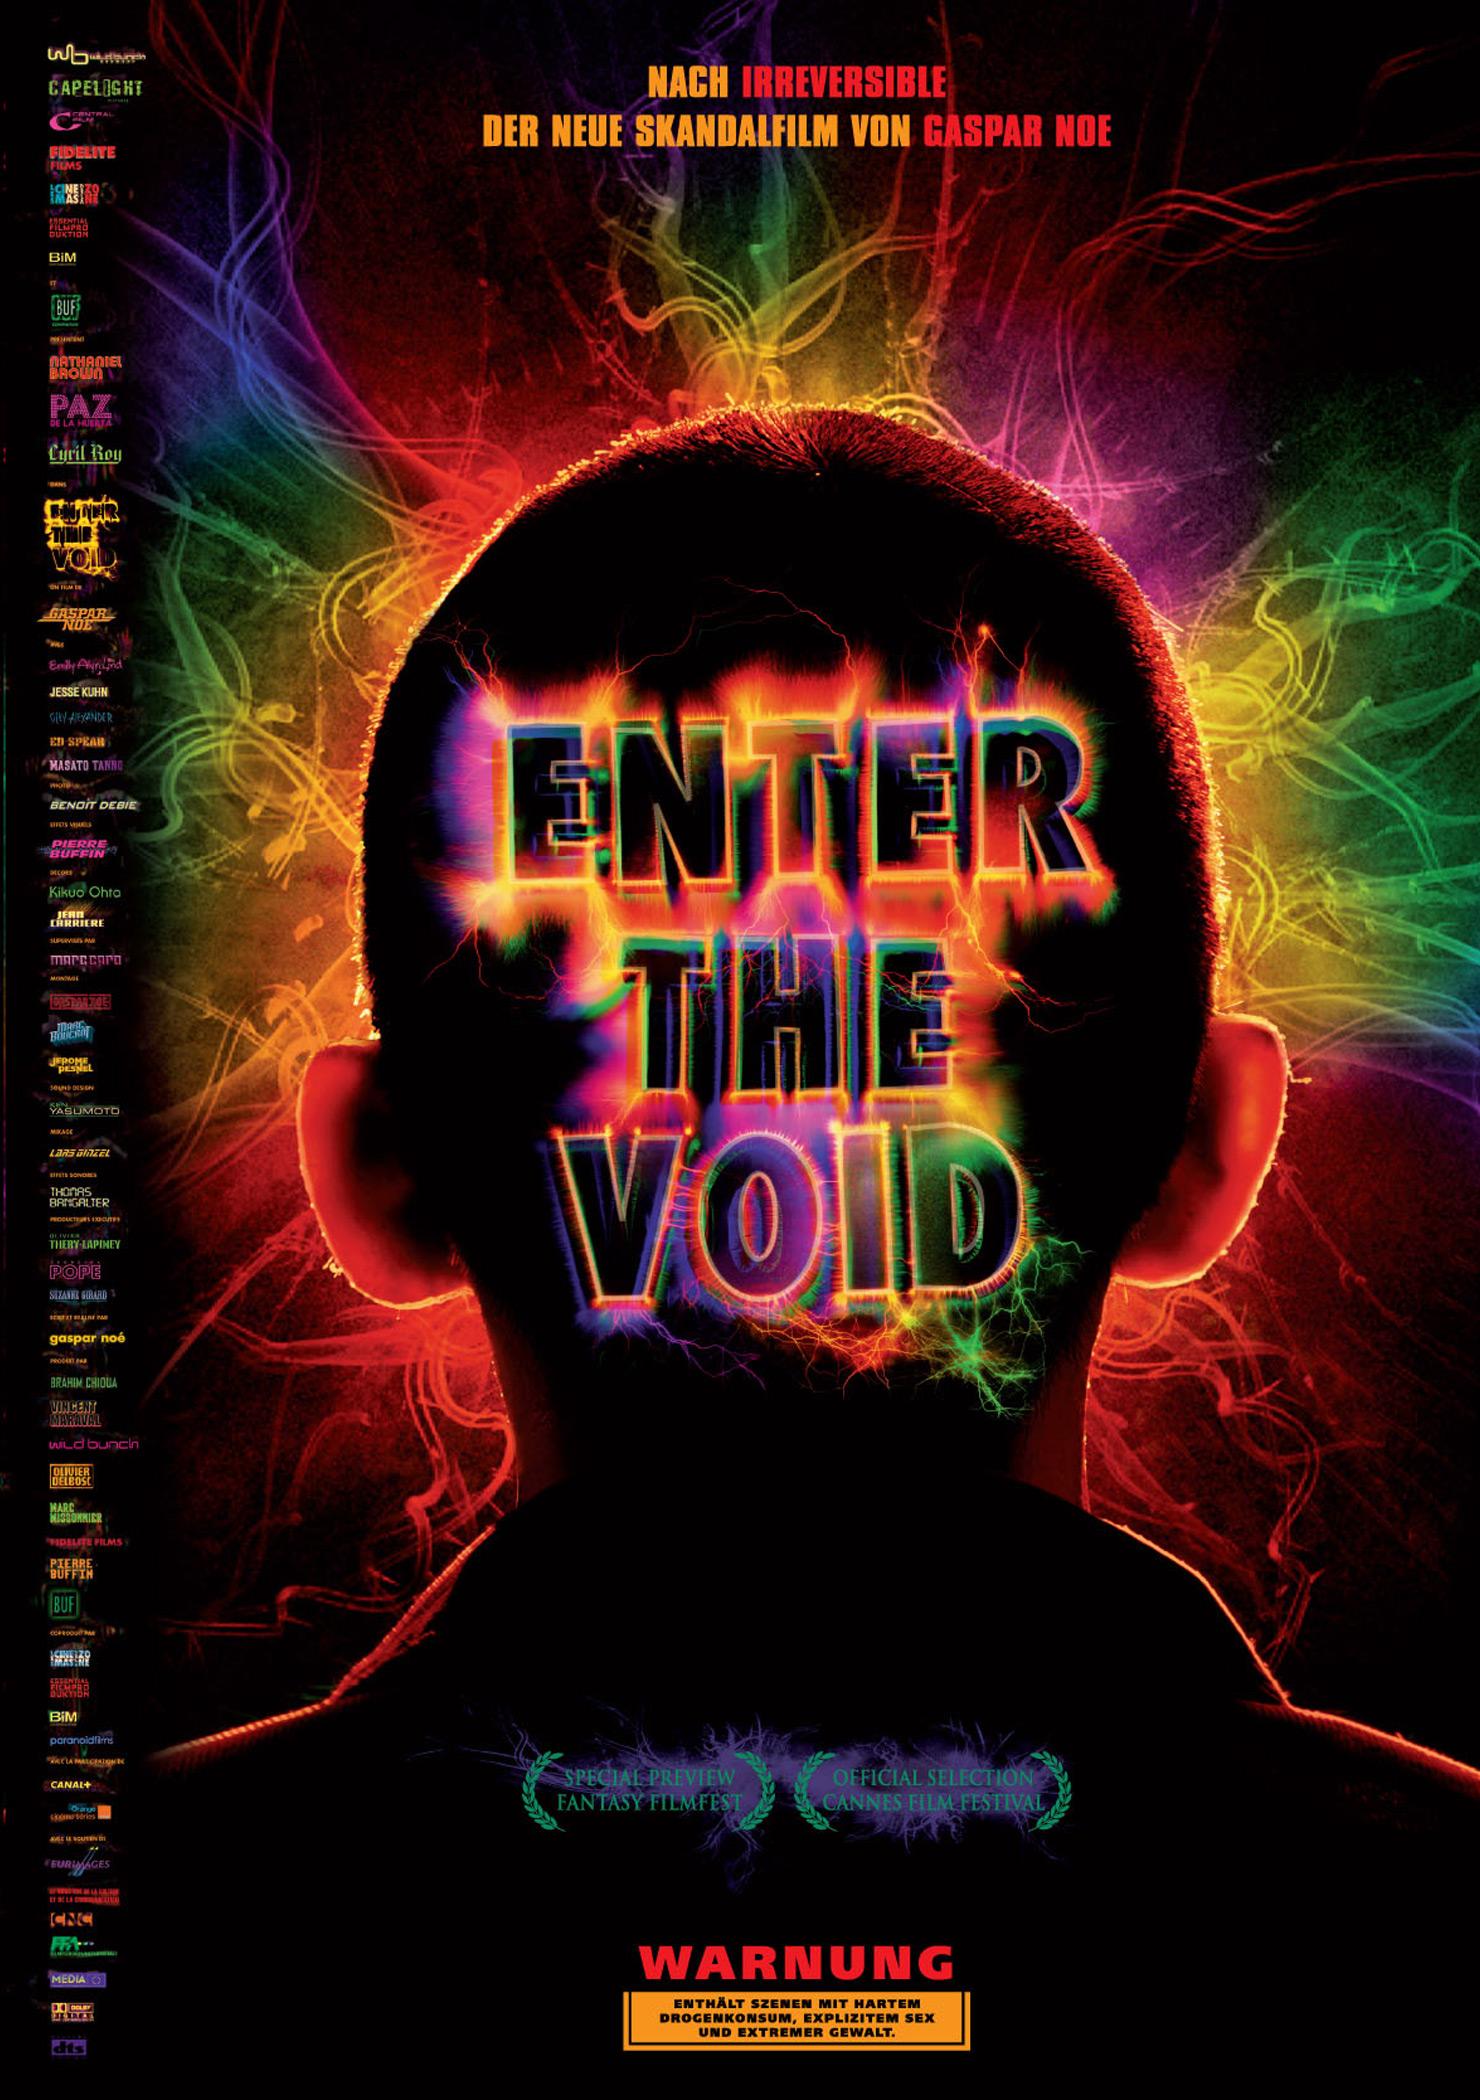 Poster of the void. Вход в пустоту 2009. Вход в пустоту / enter the Void (2009).